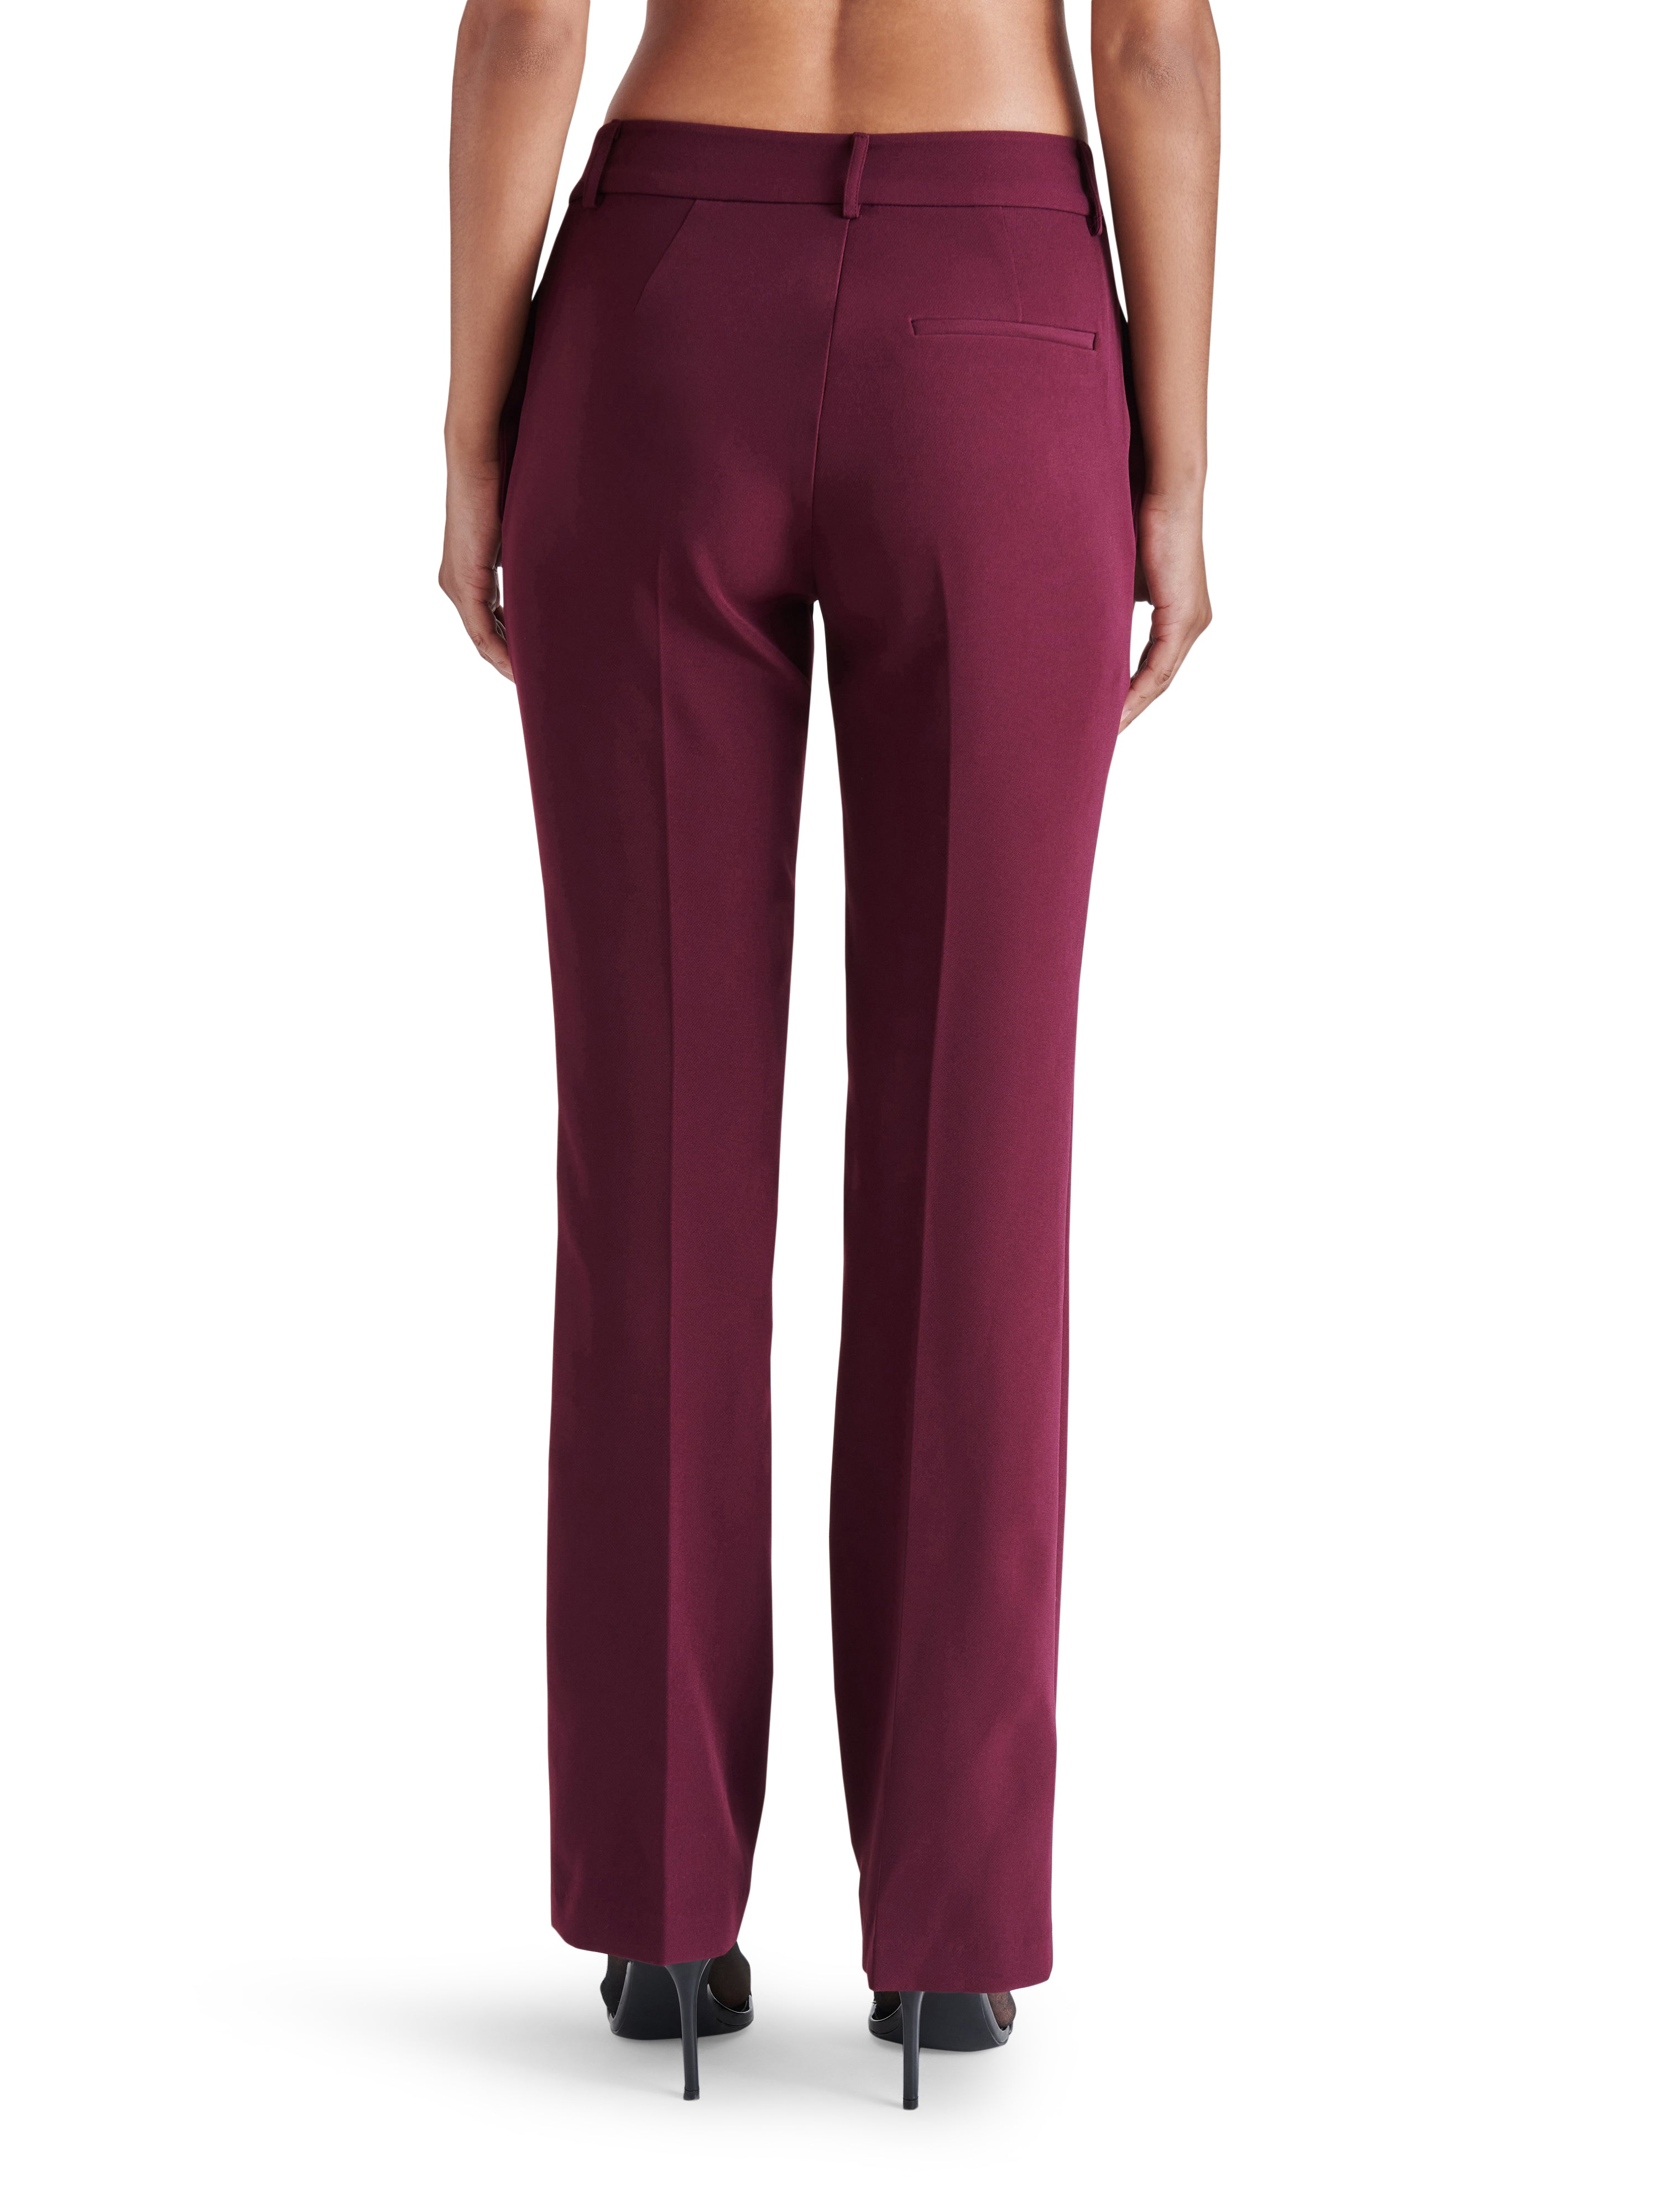 Waverly Pant in Fig